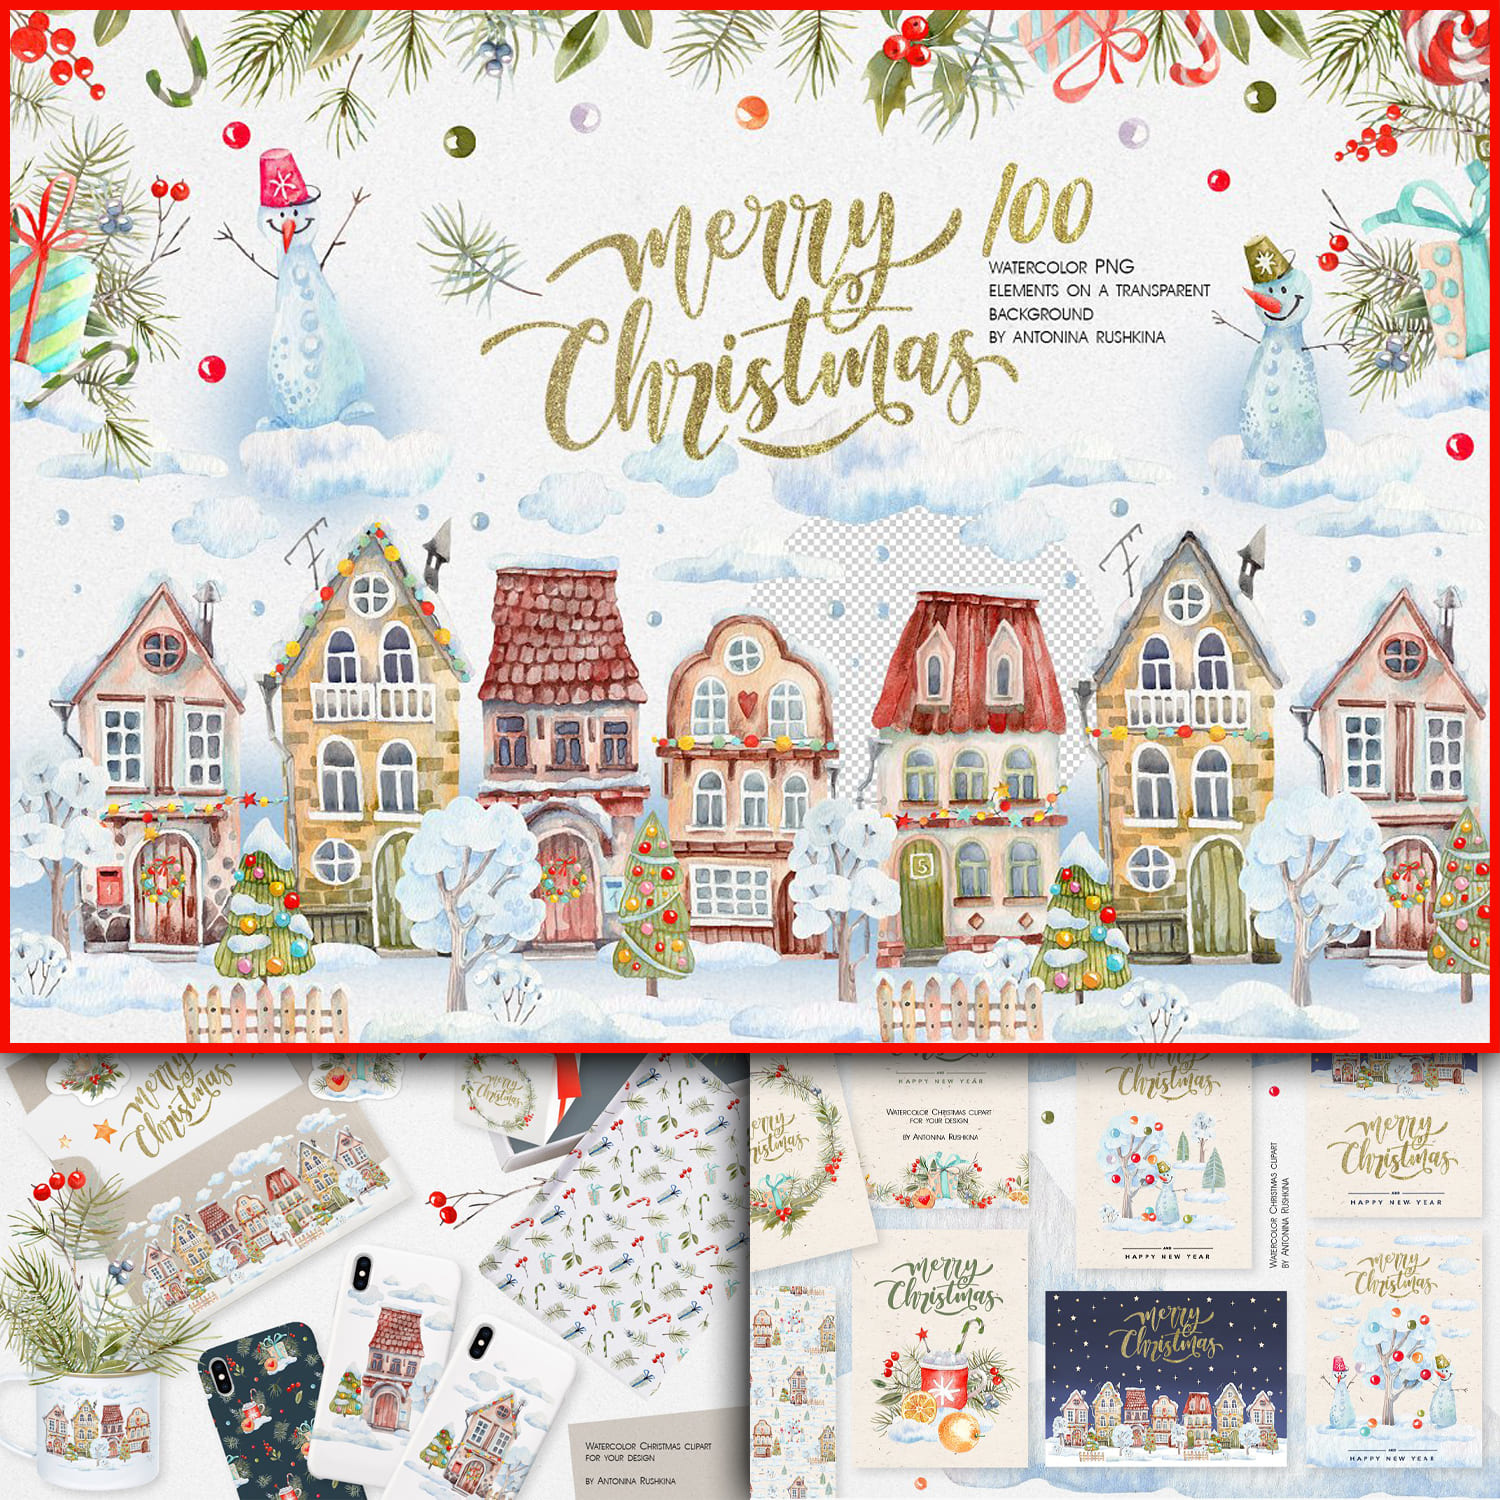 Watercolor images of houses decorated with Christmas decorations.